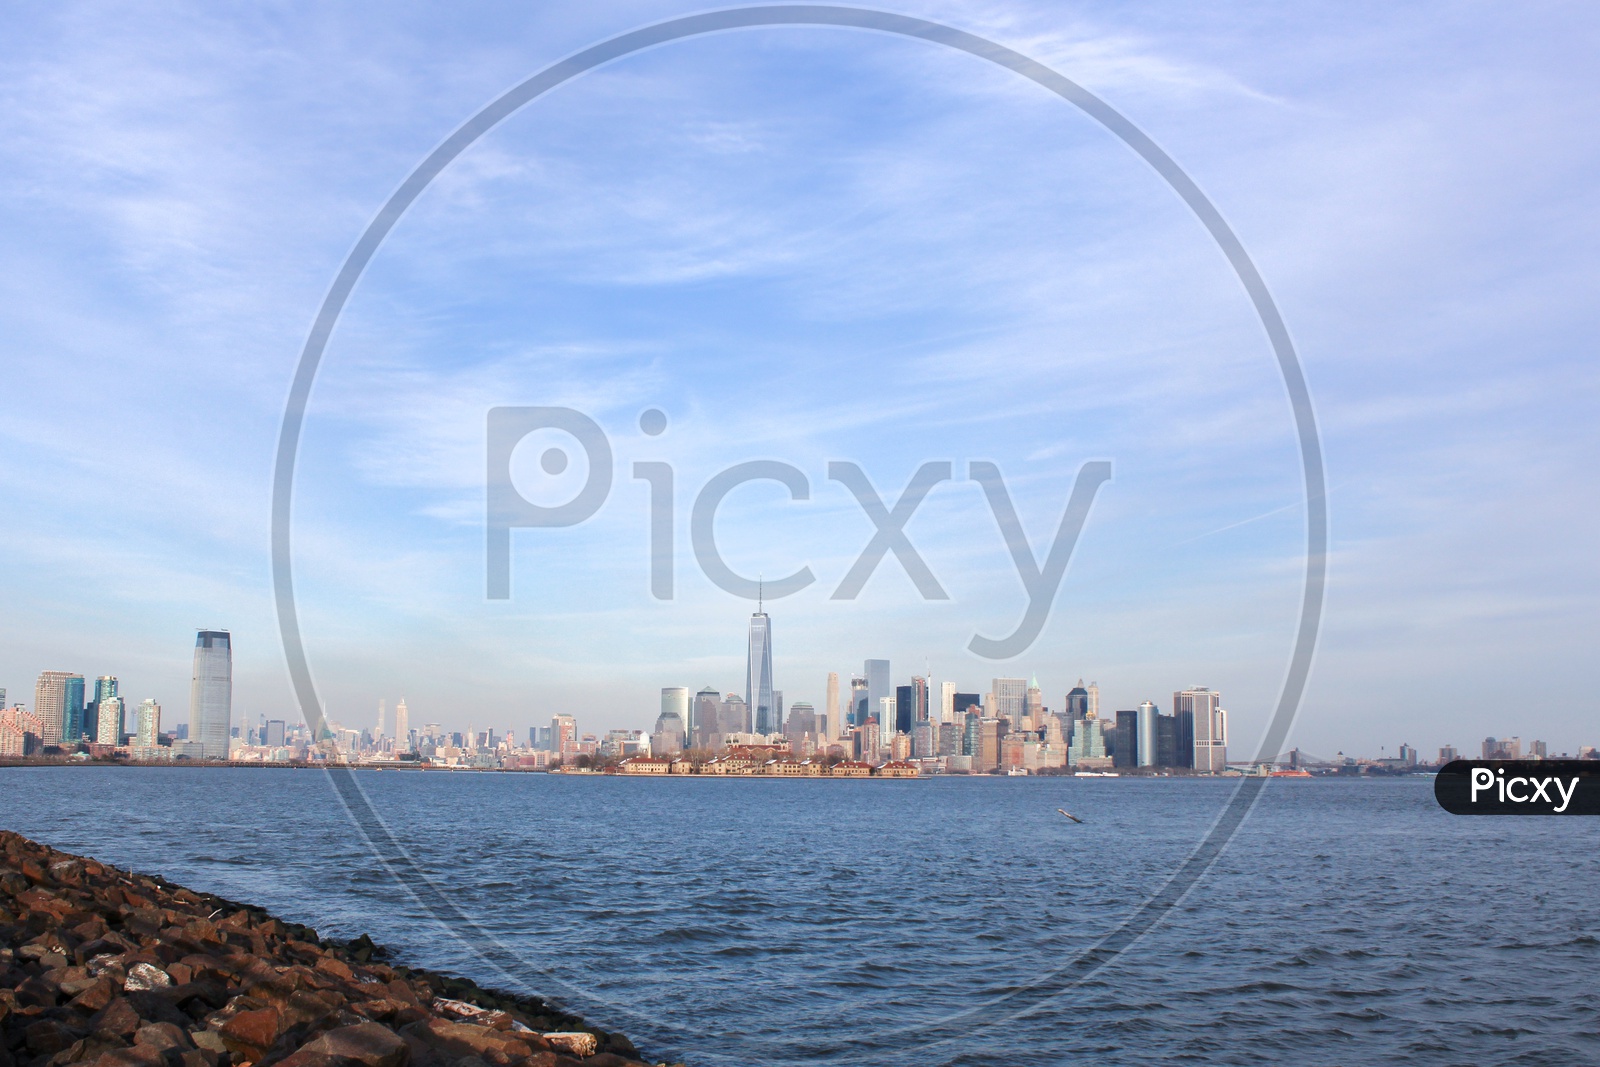 South Tip of Manhattan as seen from Liberty State Park